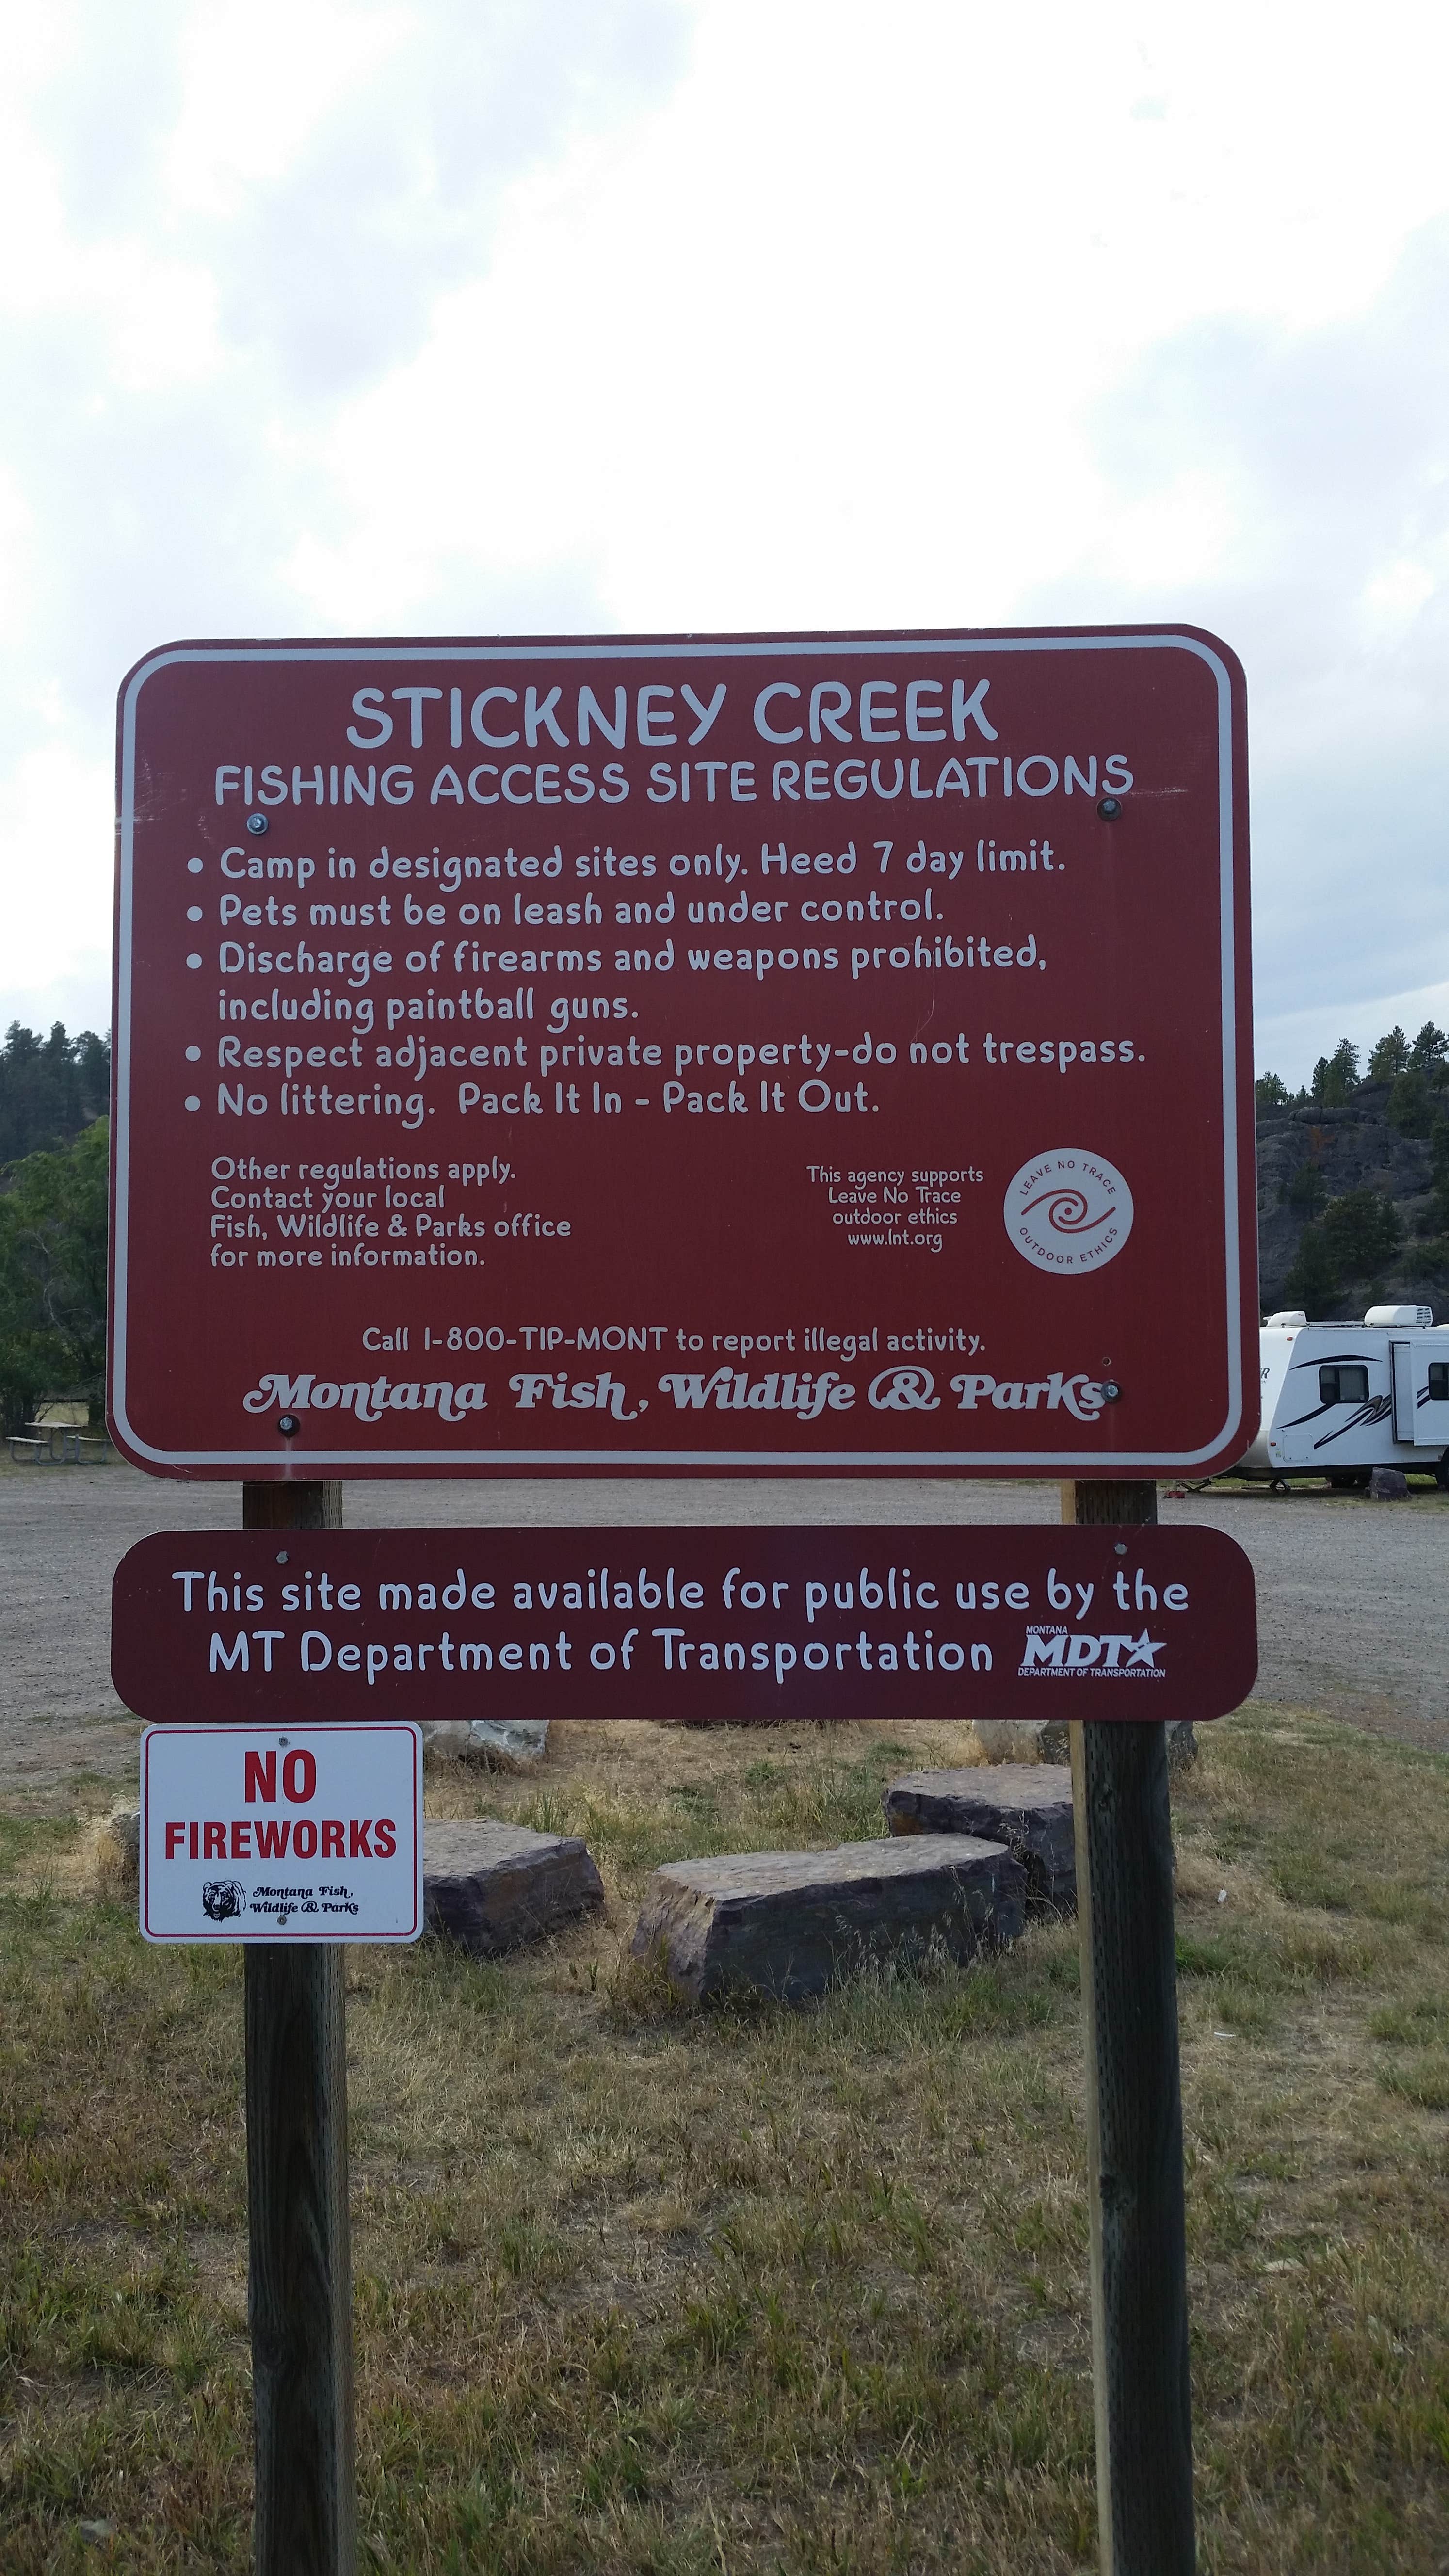 Camper submitted image from Stickney Creek Fishing Access Site - 4